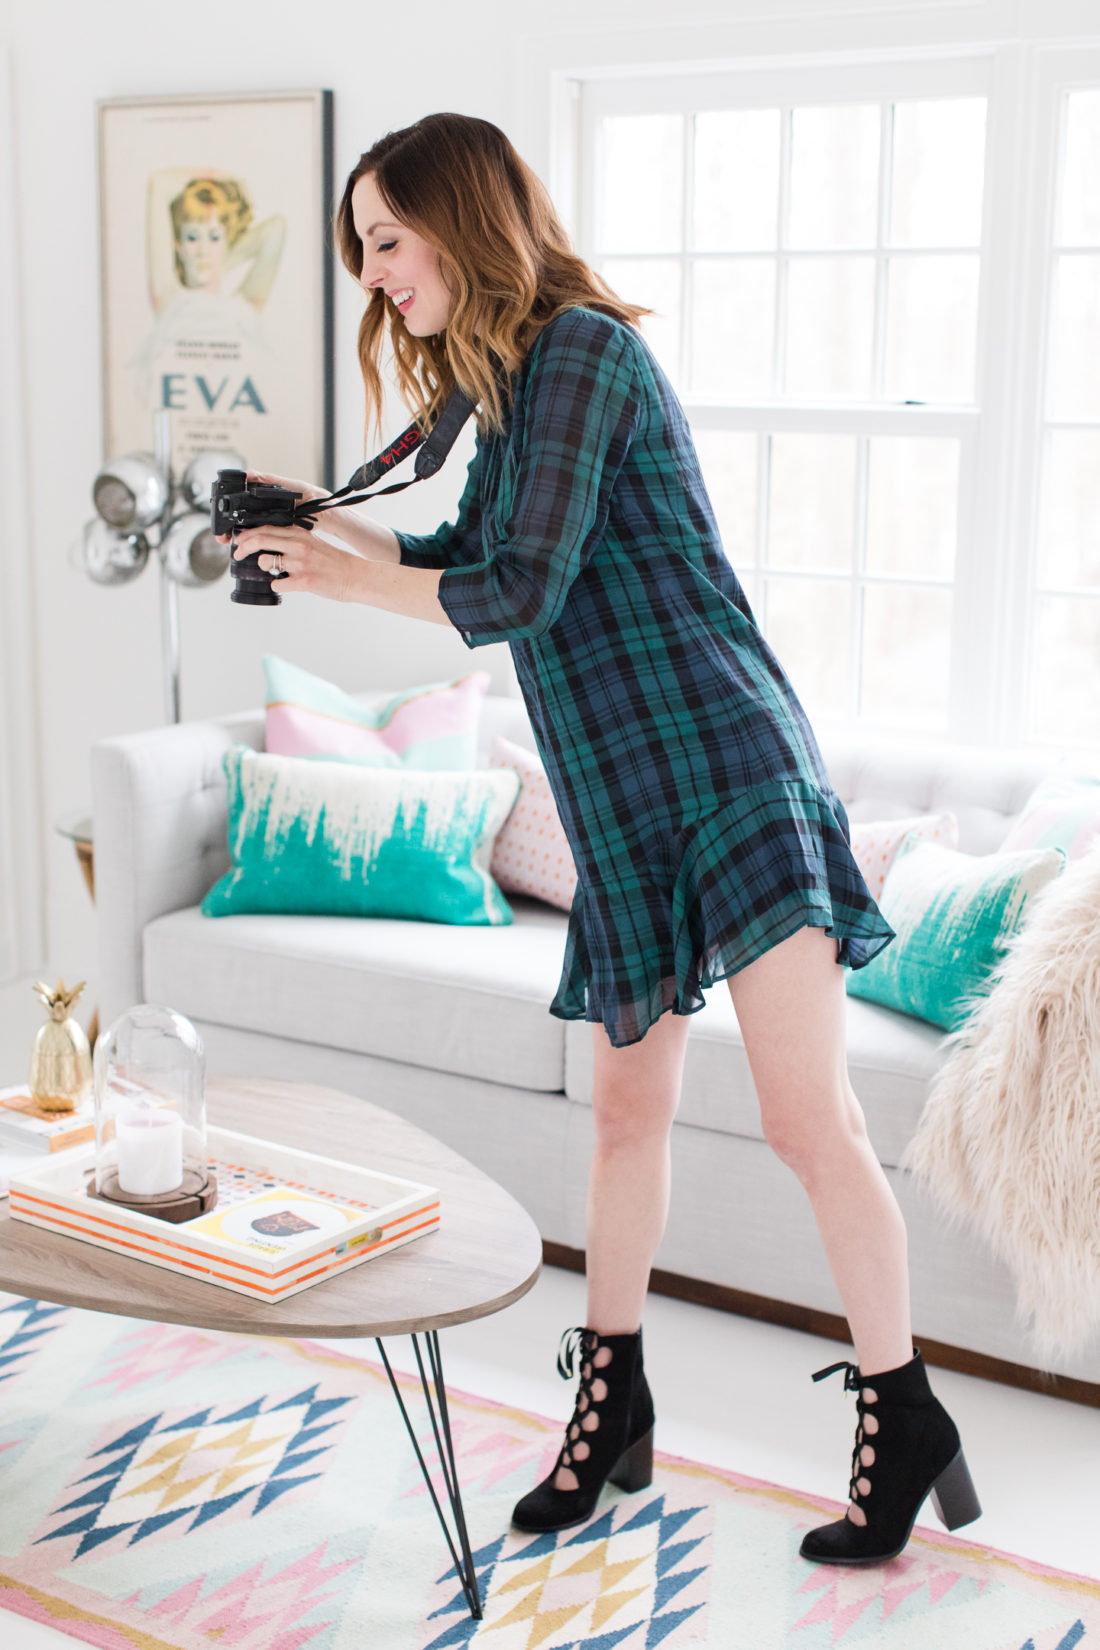 Eva Amurri Martino wears a plaid shift dress and black boots while she shoots with her camera in her studio in Connecticut.